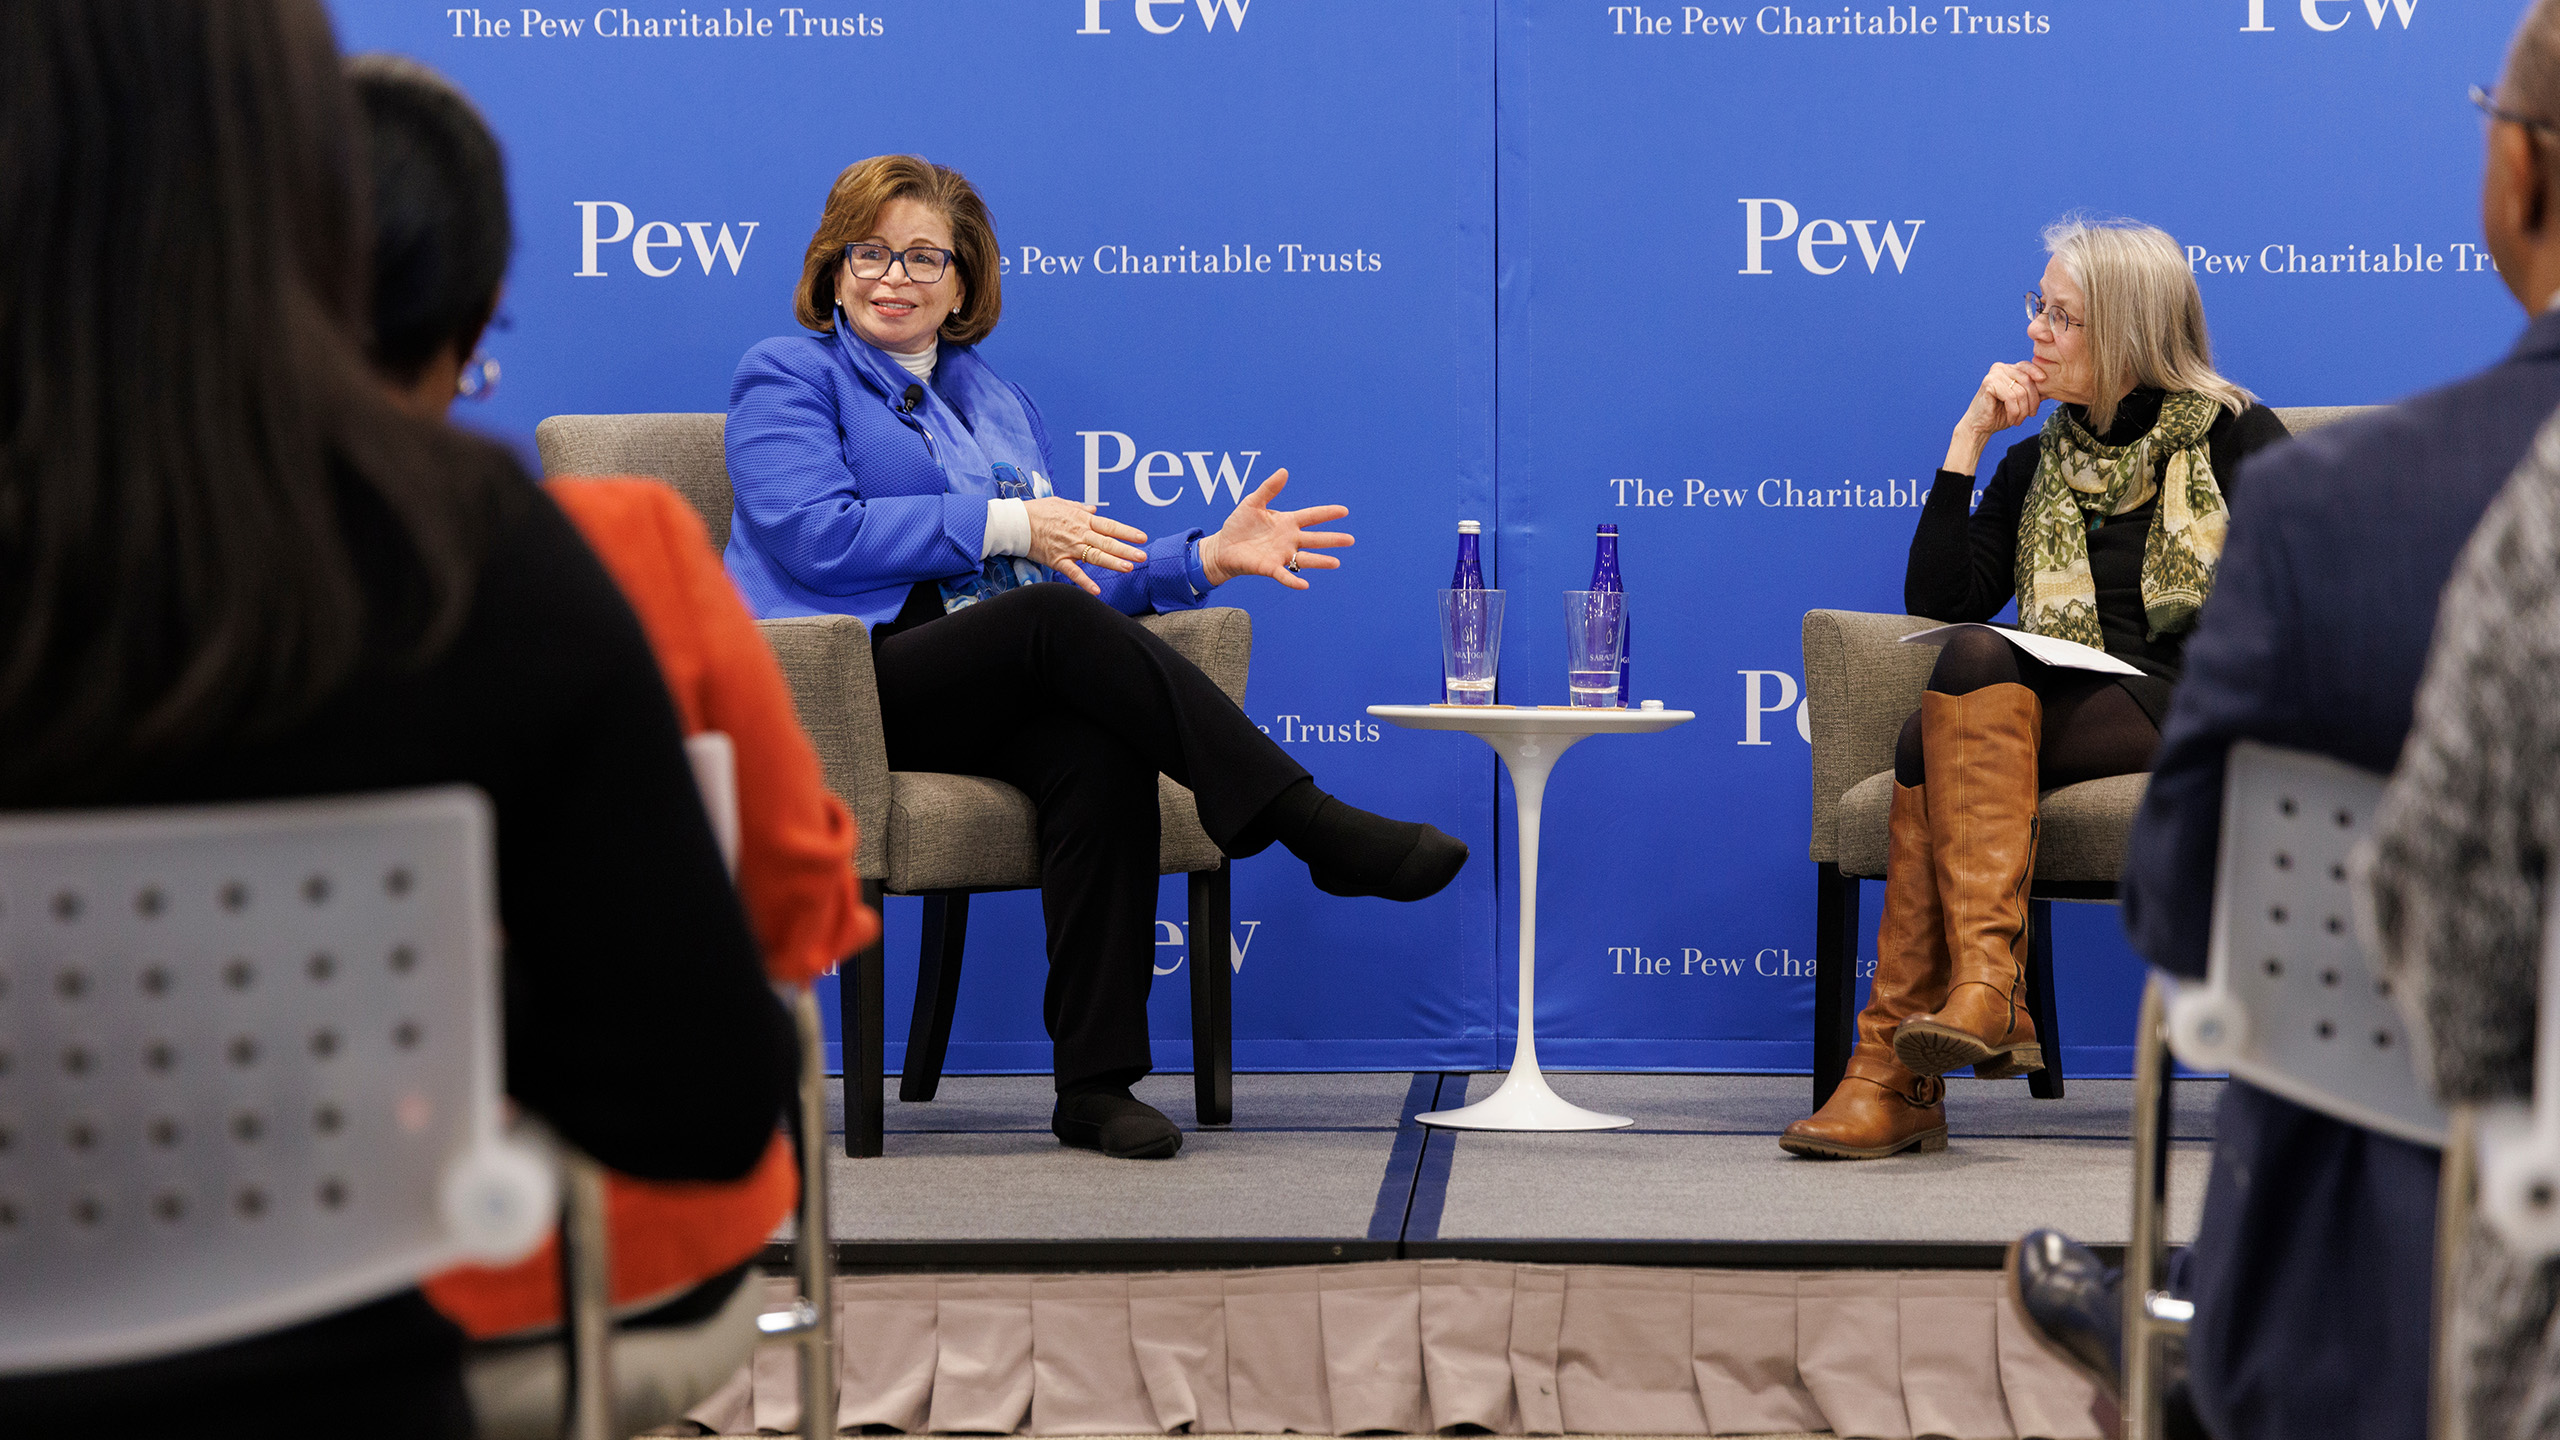  Valerie Jarrett and Susan Urahn sit facing each other on stage, in front of a room filled with Pew staff members. Jarrett and Urahn are seated in tan upholstered chairs on opposite sides of a small white pedestal table, in front of a blue backdrop featuring the Pew logo.  